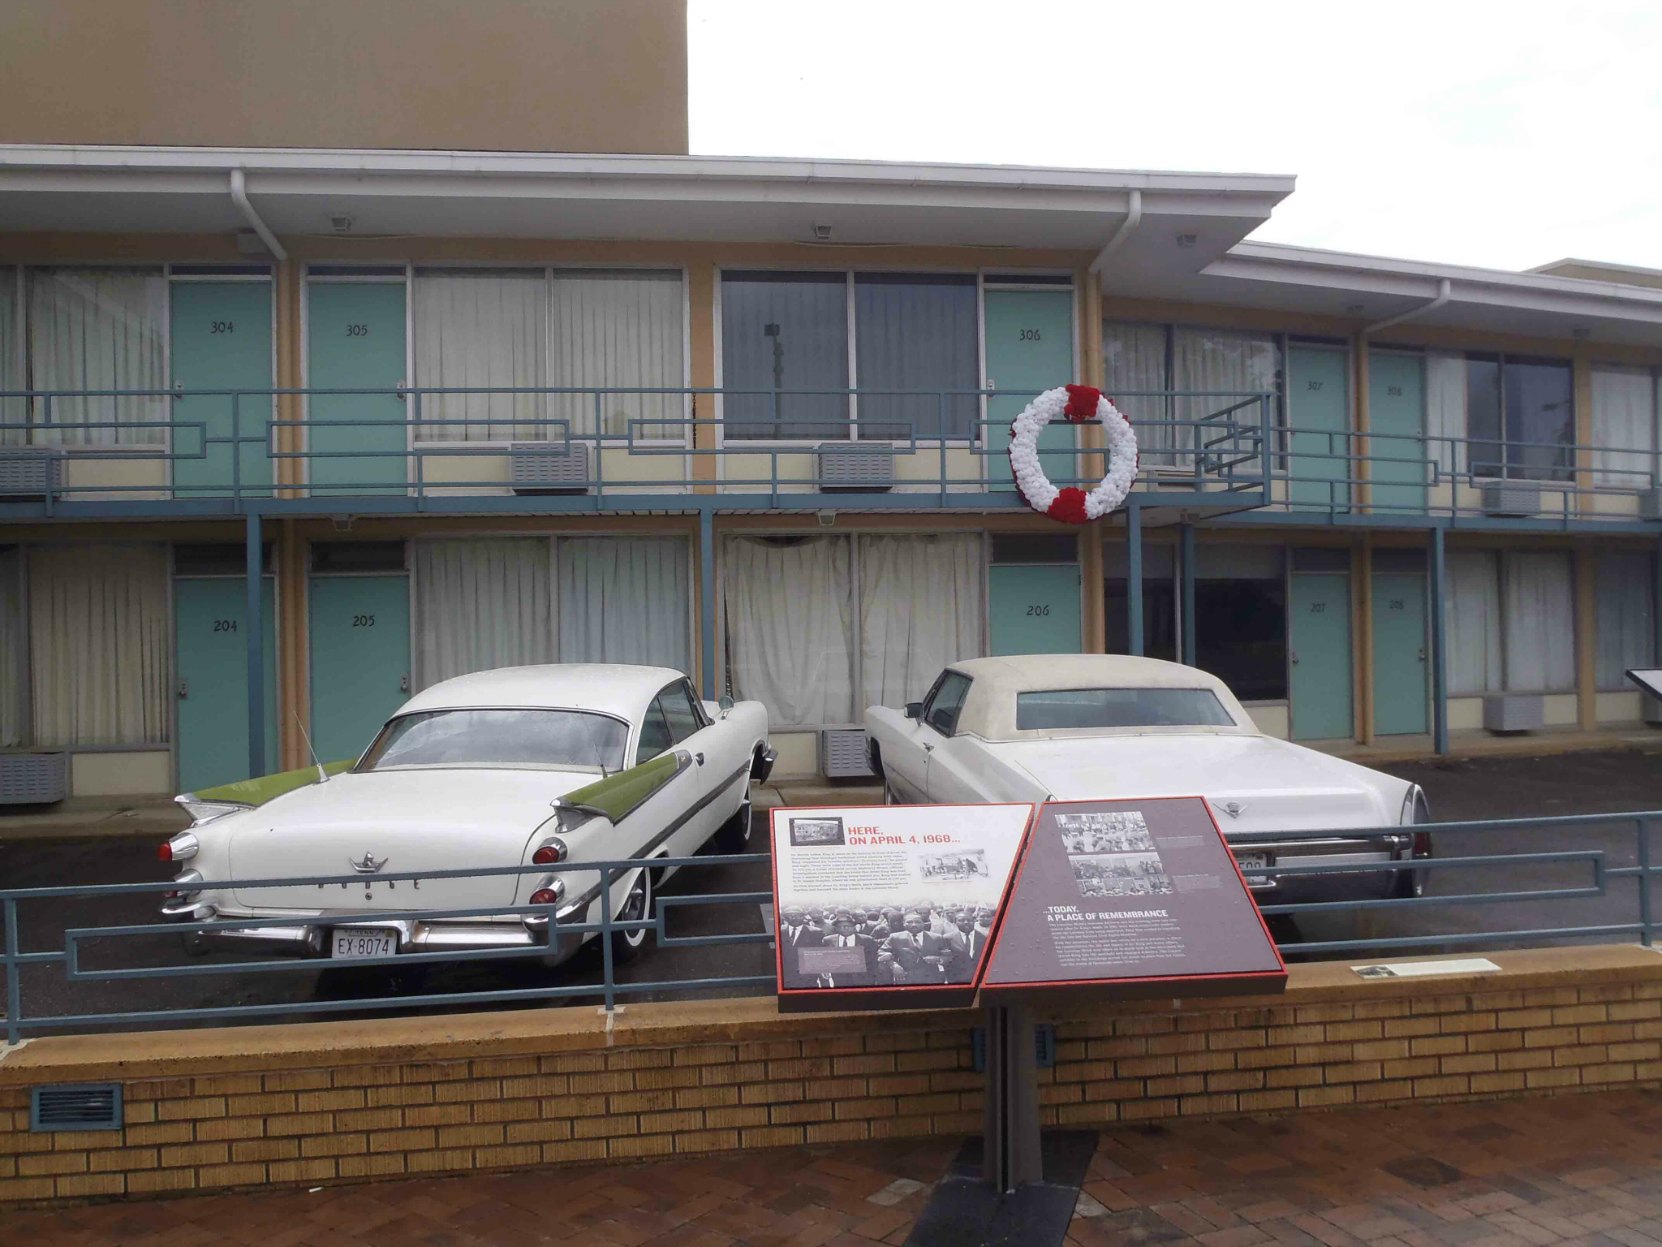 The balcony of the Lorraine Motel where Dr. Martin Luther King Jr. was shot. The red and white wreath marks the spot where Dr, King fell after being shot by James Earl Ray.